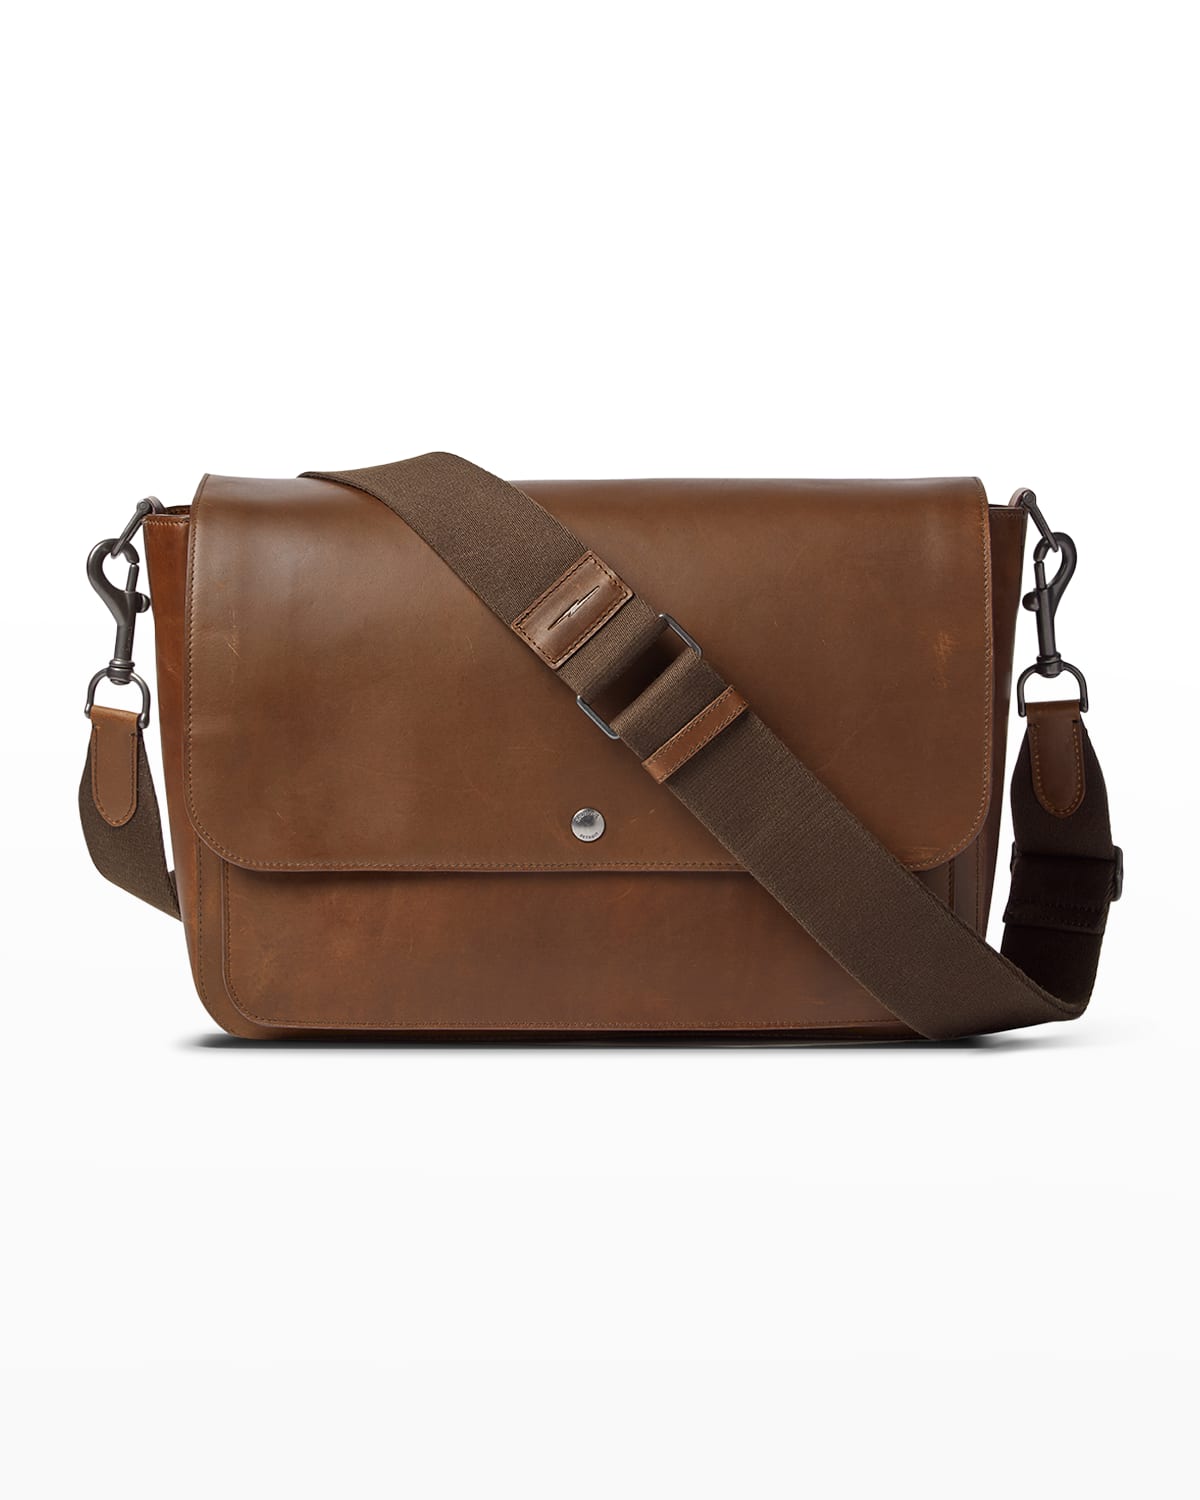 SHINOLA MEN'S CANFIELD RELAXED LEATHER MESSENGER BAG